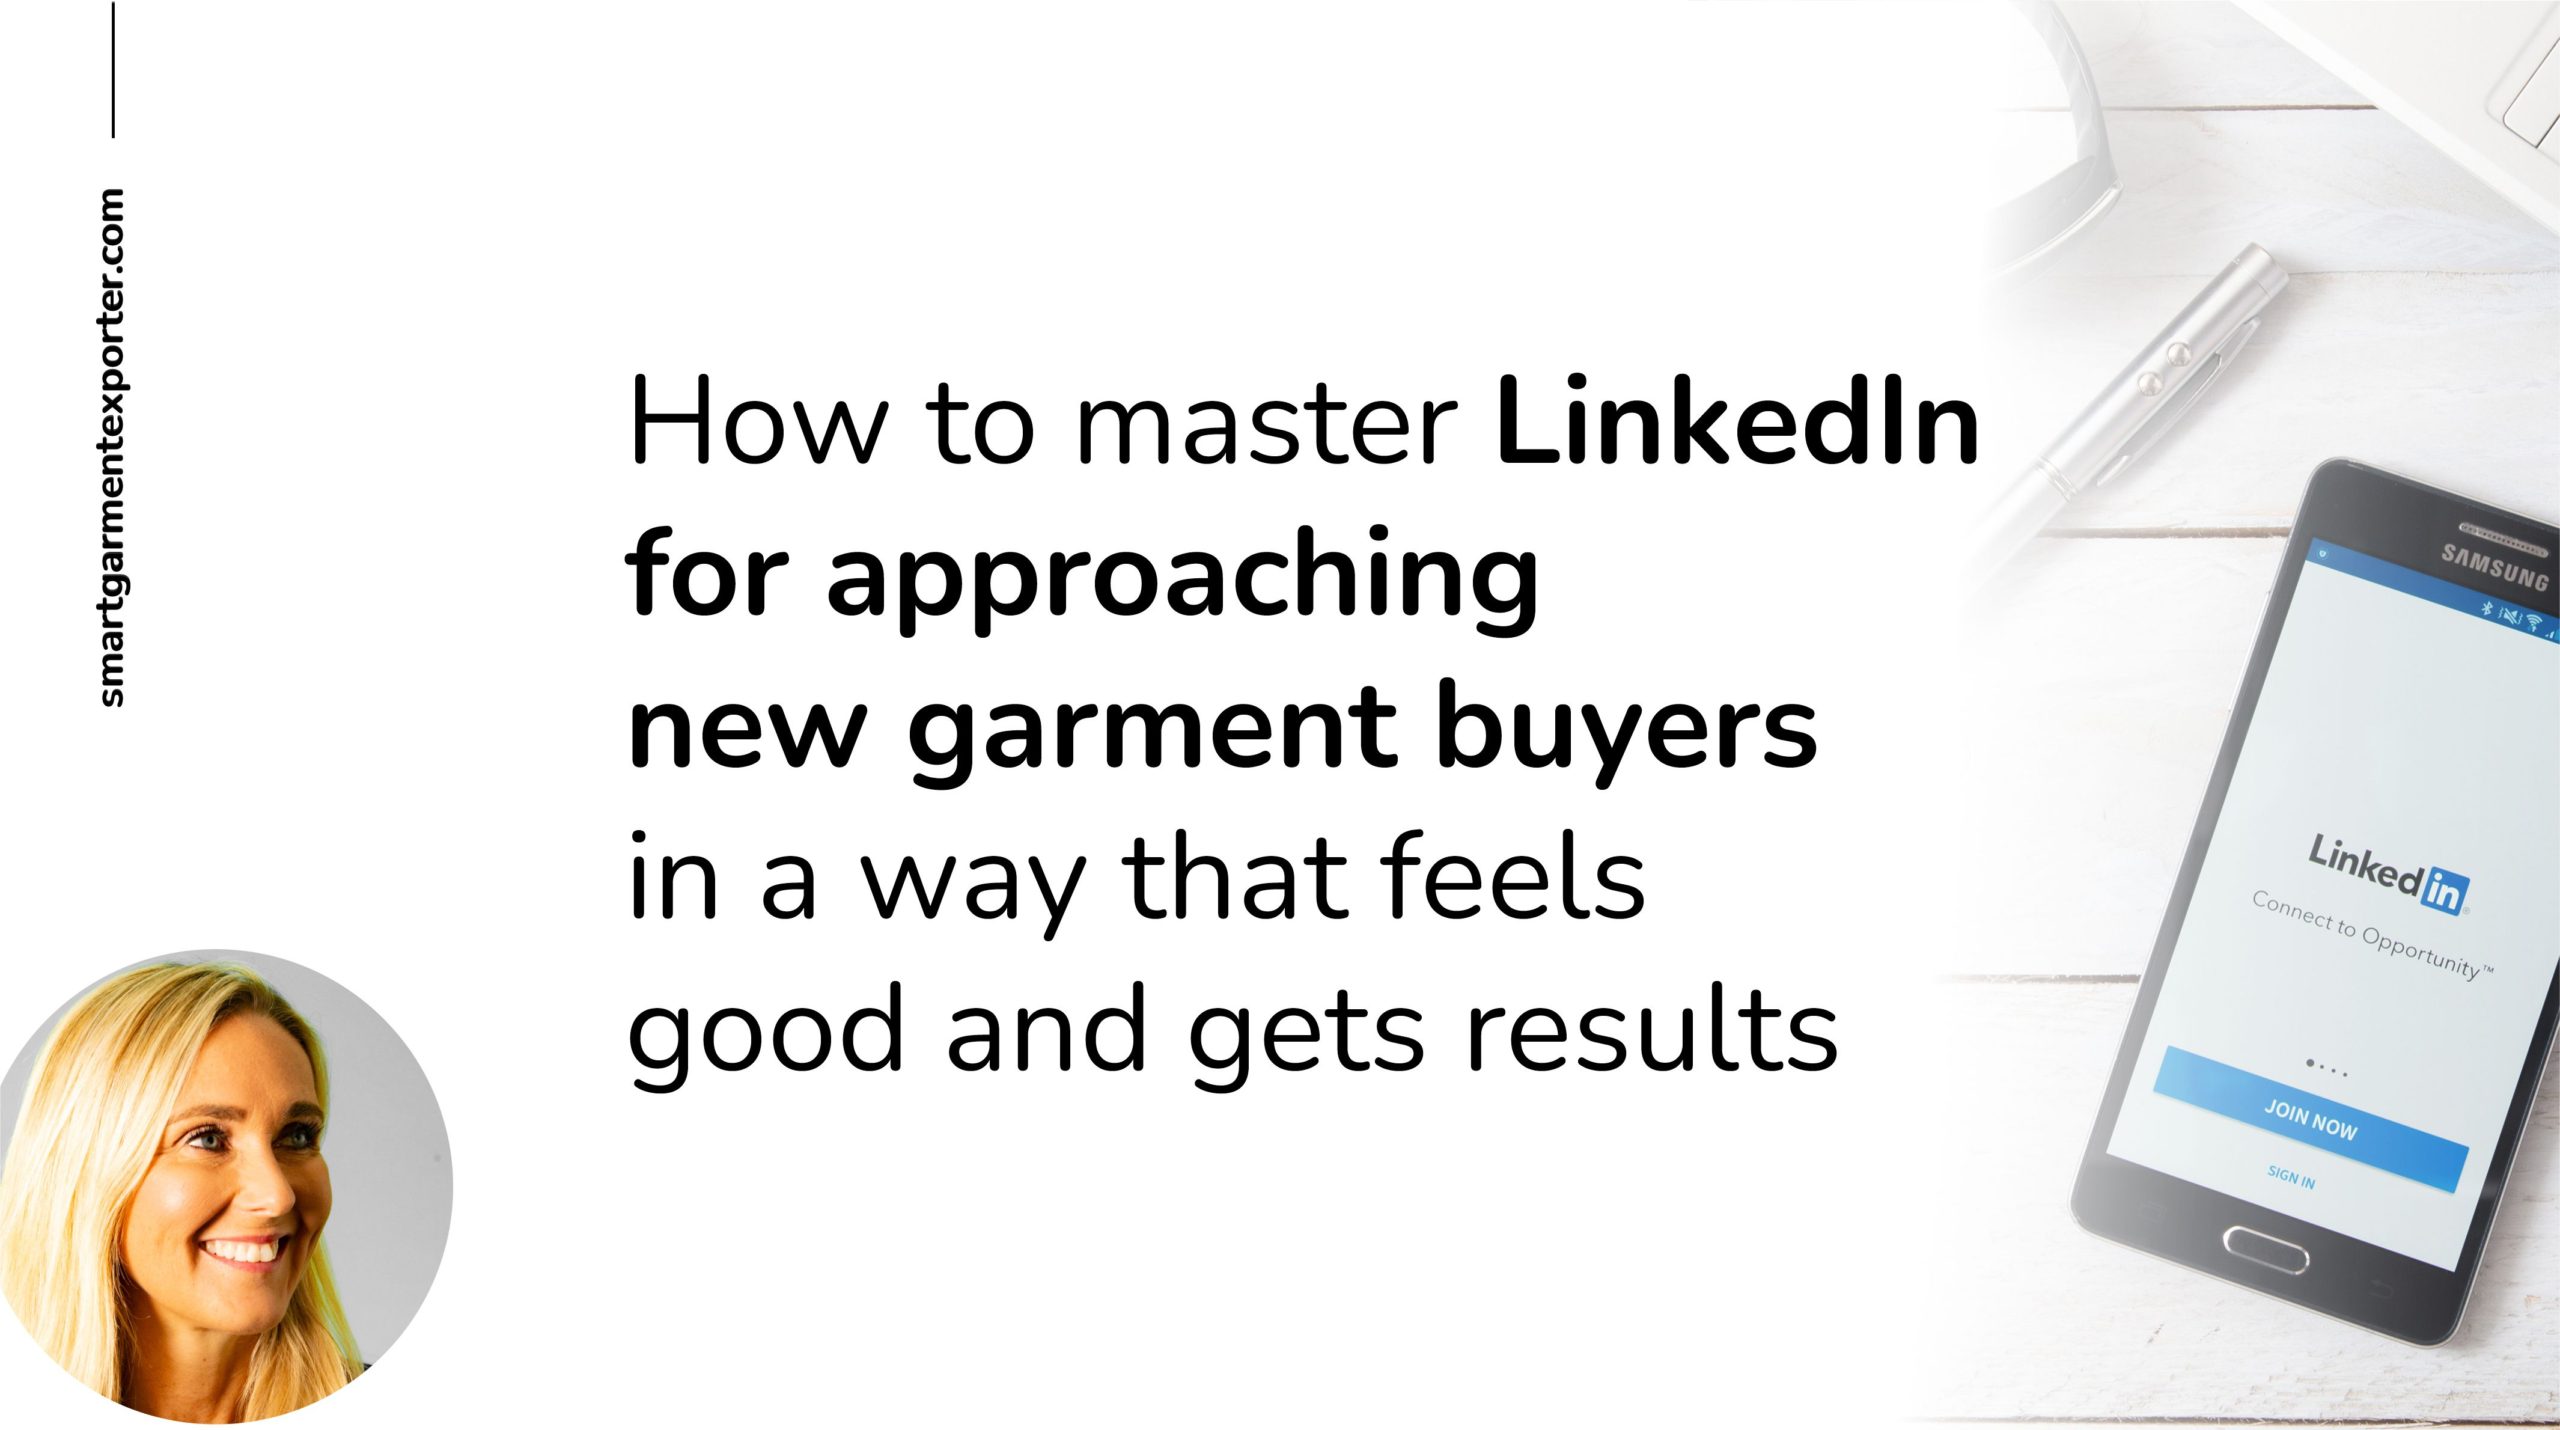 How to master LinkedIn for approaching new garment buyers in a way that feels good and gets results